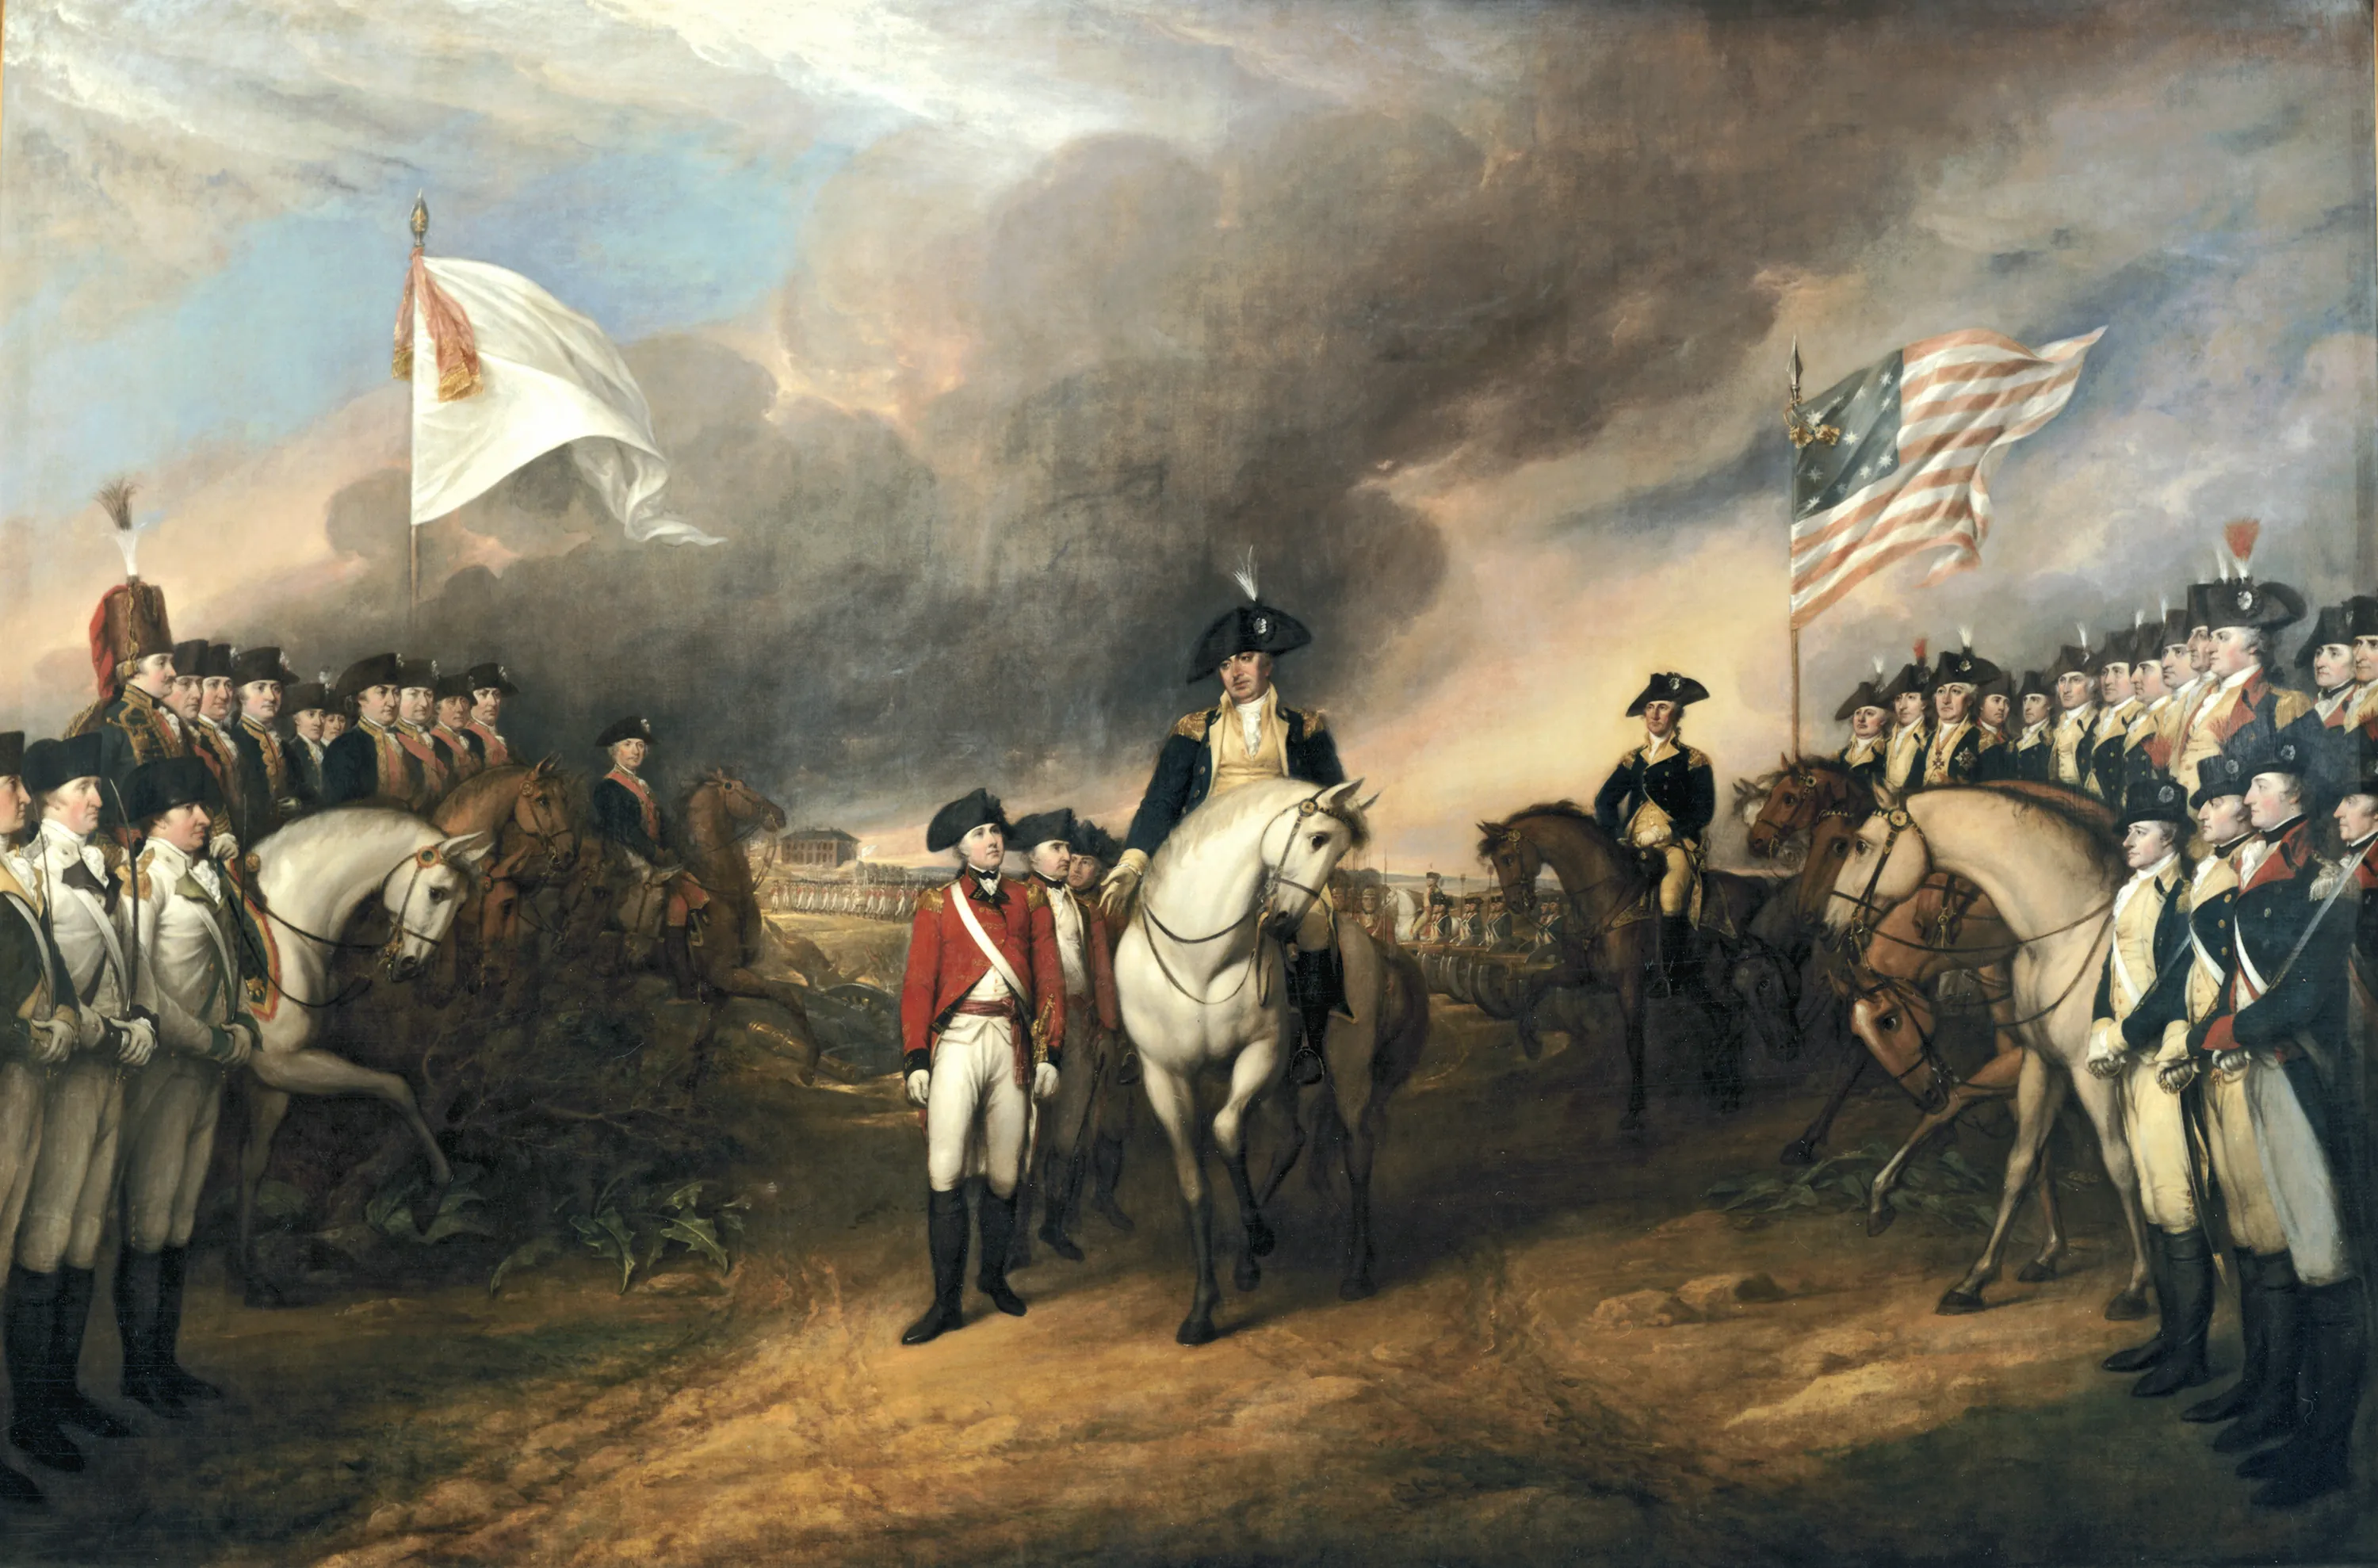 A period painting showing Lord Cornwall surrendering to George Washington after the Battle of Yorktown.